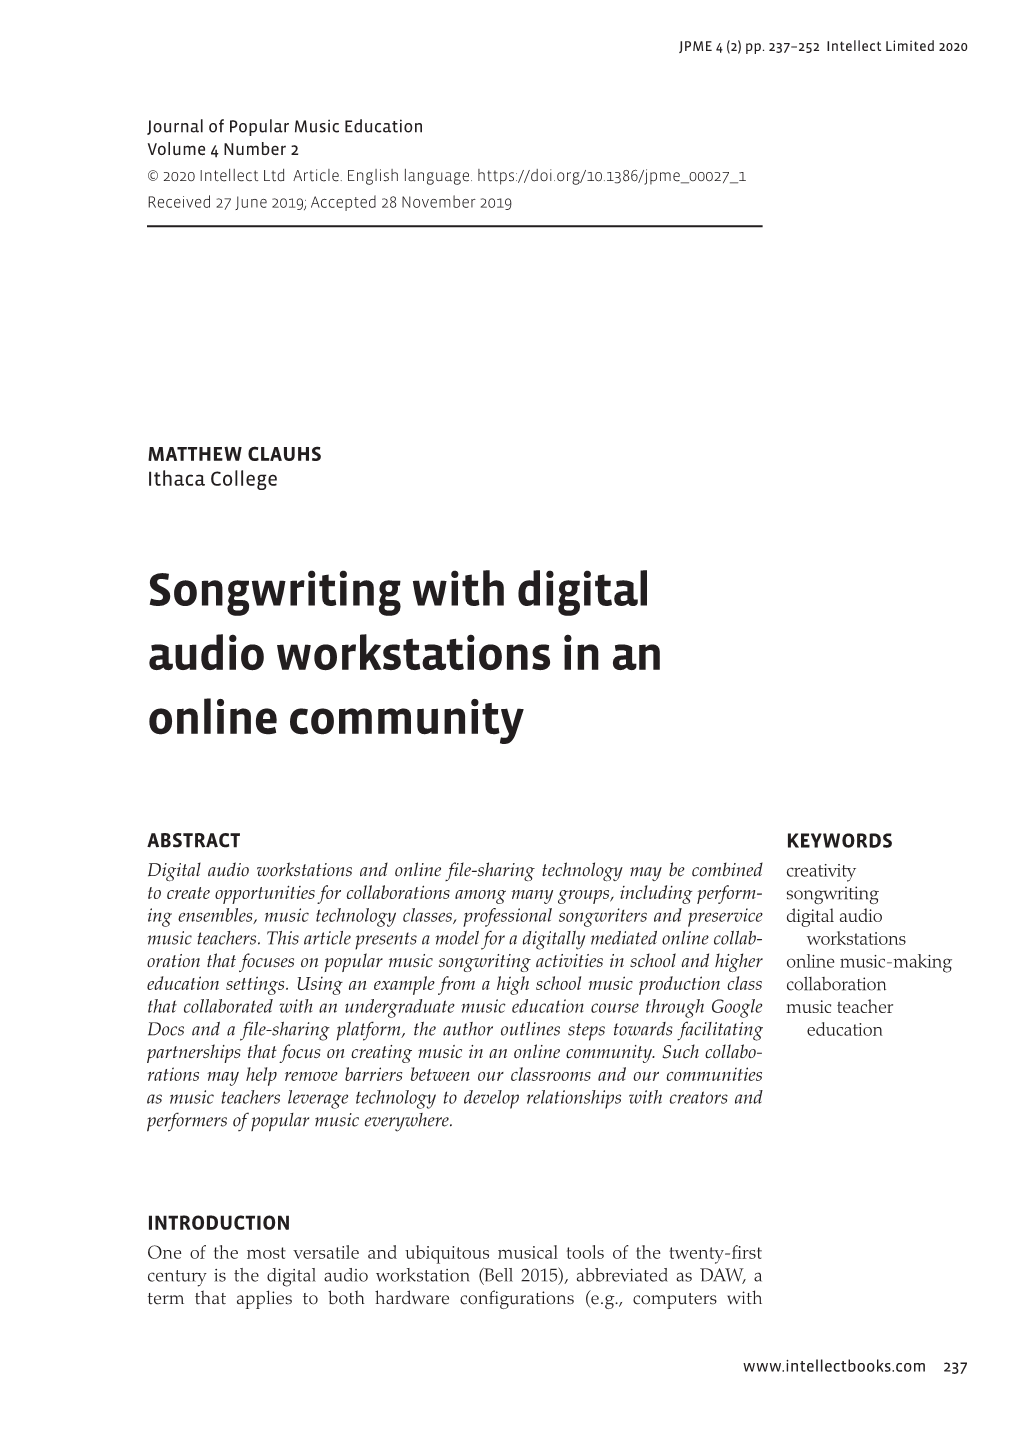 Songwriting with Digital Audio Workstations in an Online Community